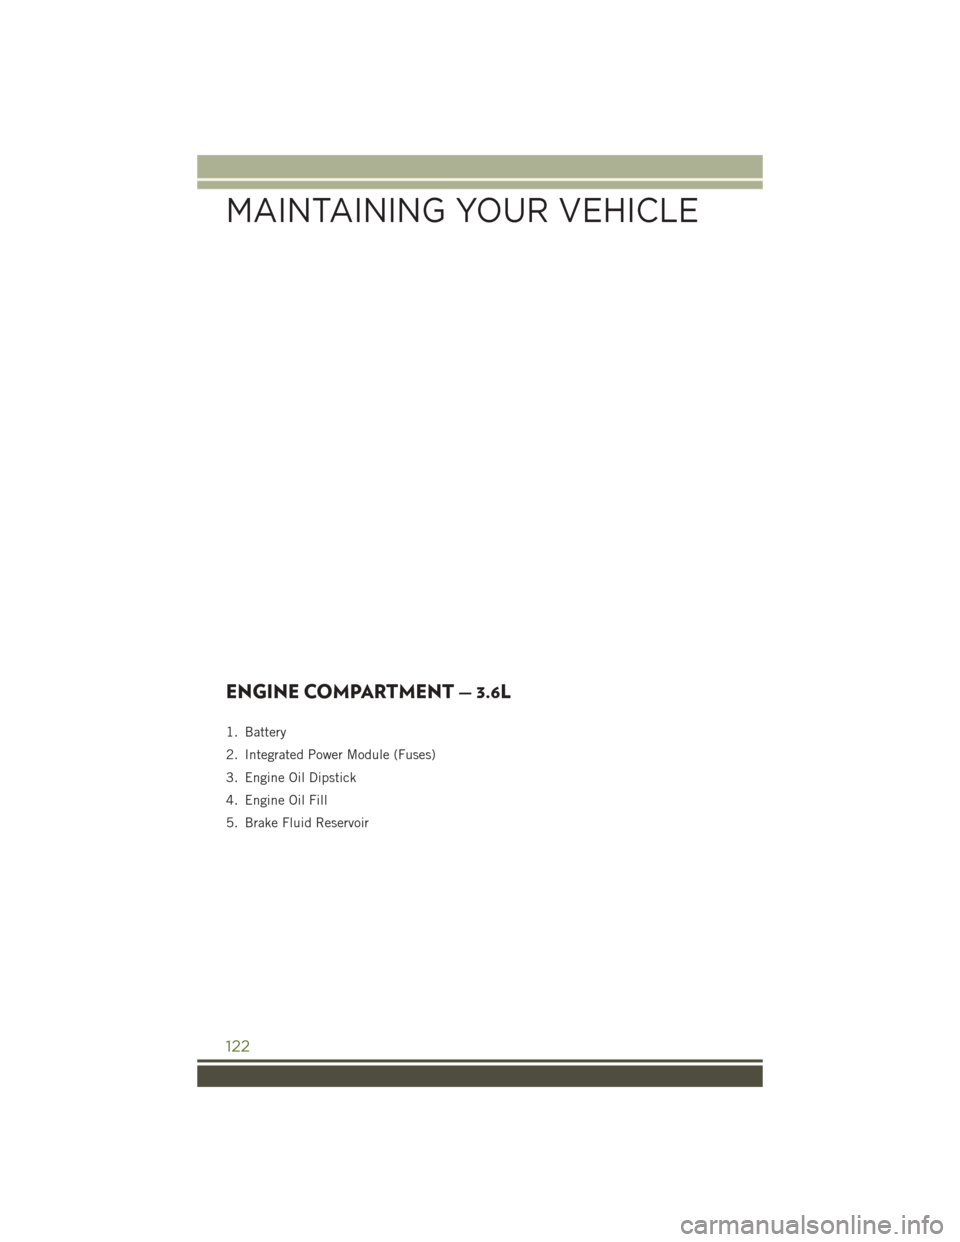 JEEP WRANGLER 2016 JK / 3.G User Guide ENGINE COMPARTMENT — 3.6L
1. Battery
2. Integrated Power Module (Fuses)
3. Engine Oil Dipstick
4. Engine Oil Fill
5. Brake Fluid Reservoir
MAINTAINING YOUR VEHICLE
122 